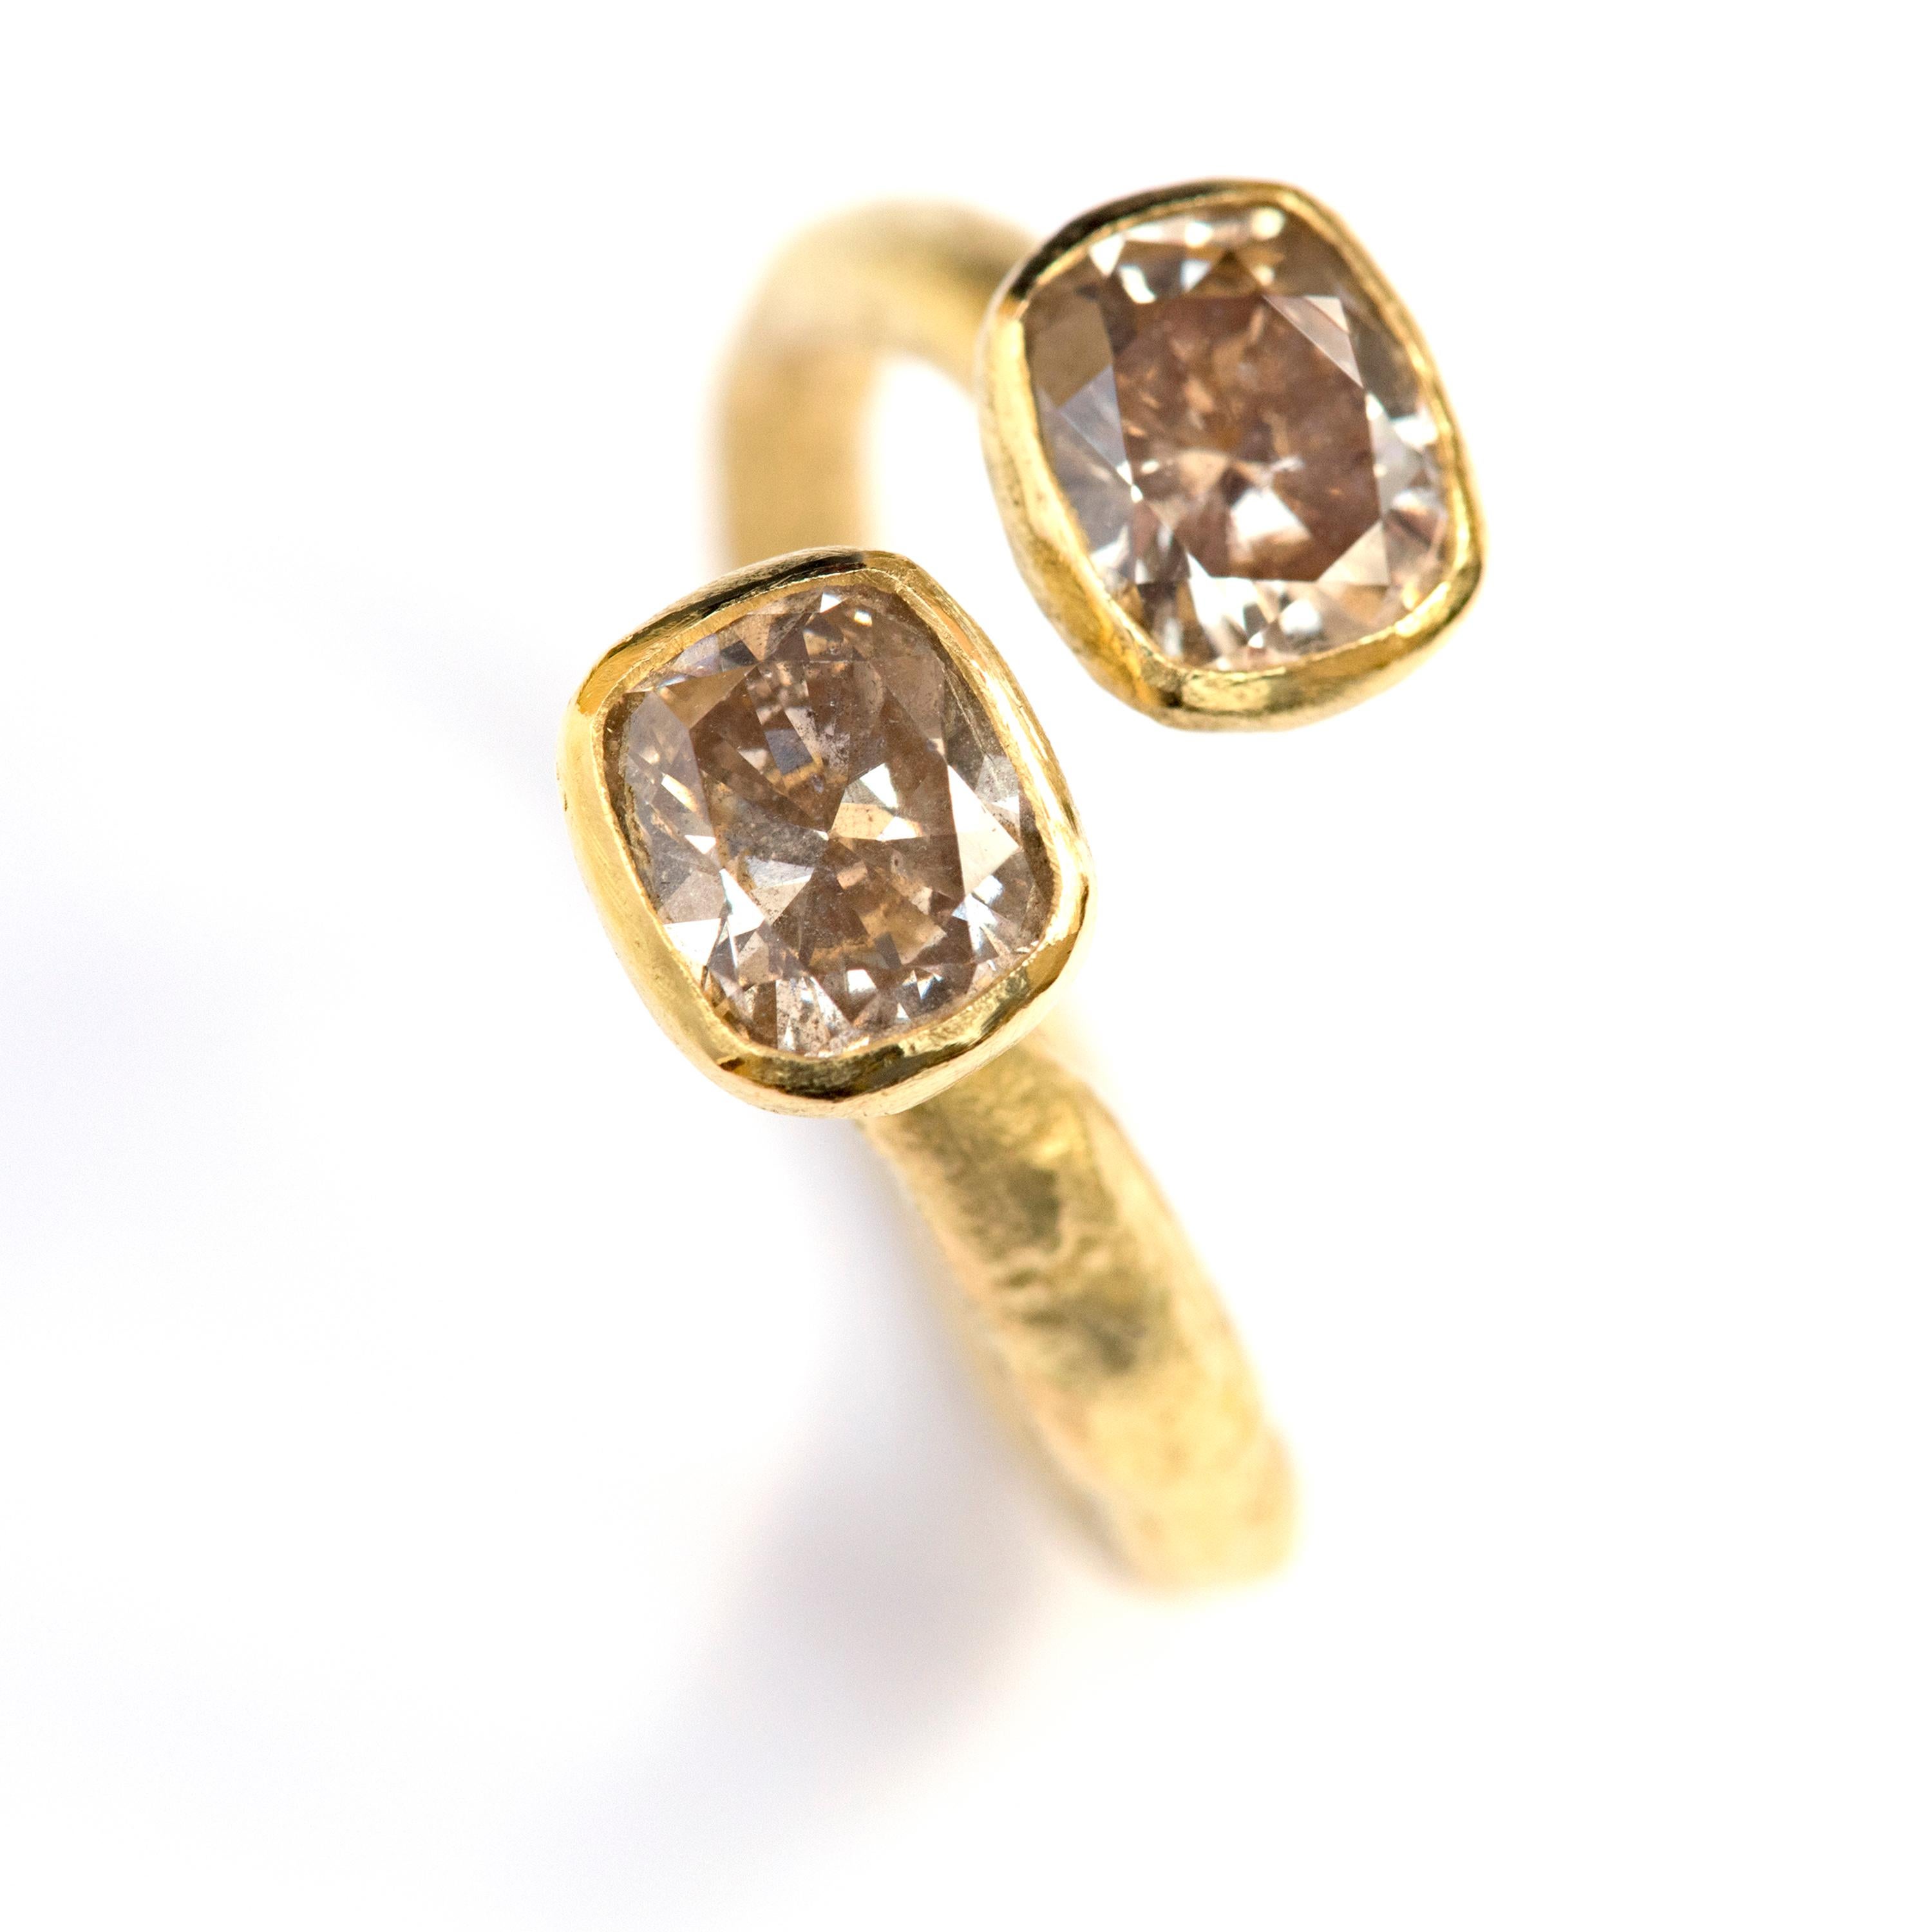 18k Gold textured open ring with two cushion cut Brown Diamonds, one carat each. This ring has been handmade by renowned Goldsmith Disa Allsopp using reticulation techniques. The 1ct warm brown diamonds are set in tapered 18k yellow gold rubover